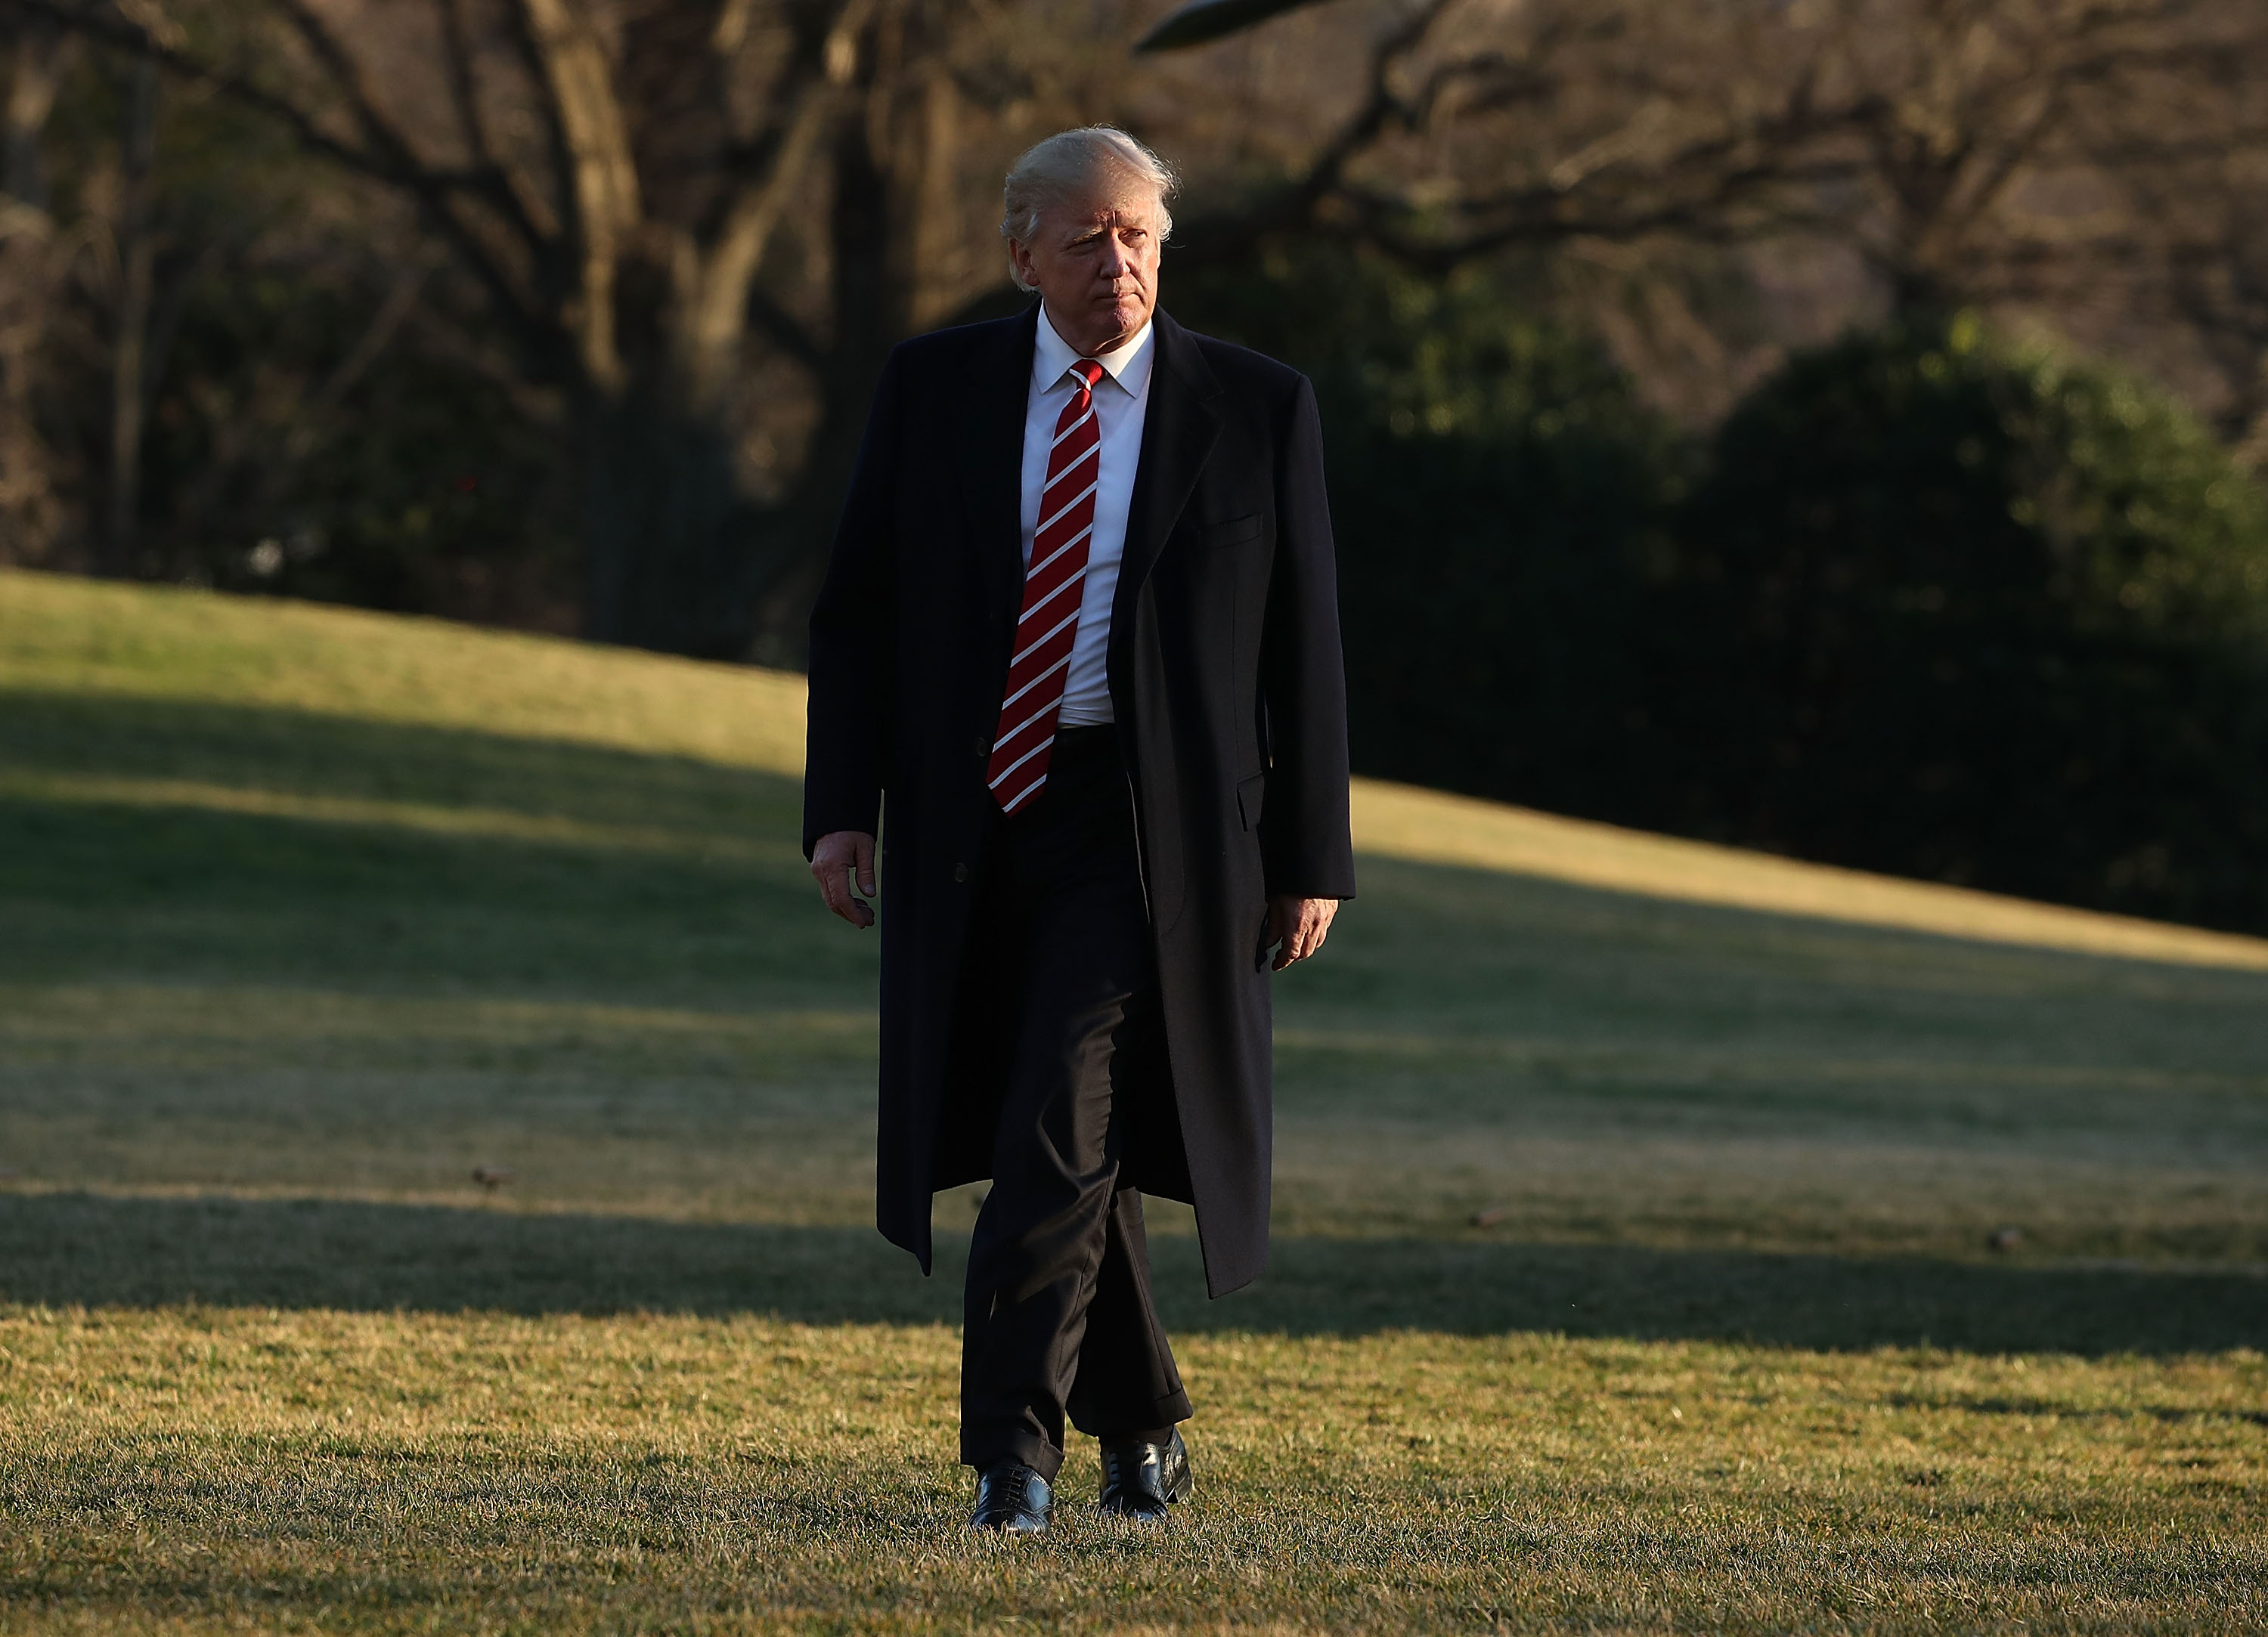 U.S. President Donald Trump arrives back at the White House after spending the weekend in Florida, on Feb. 6, 2017 in Washington, D.C. (Mark Wilson/Getty Images)